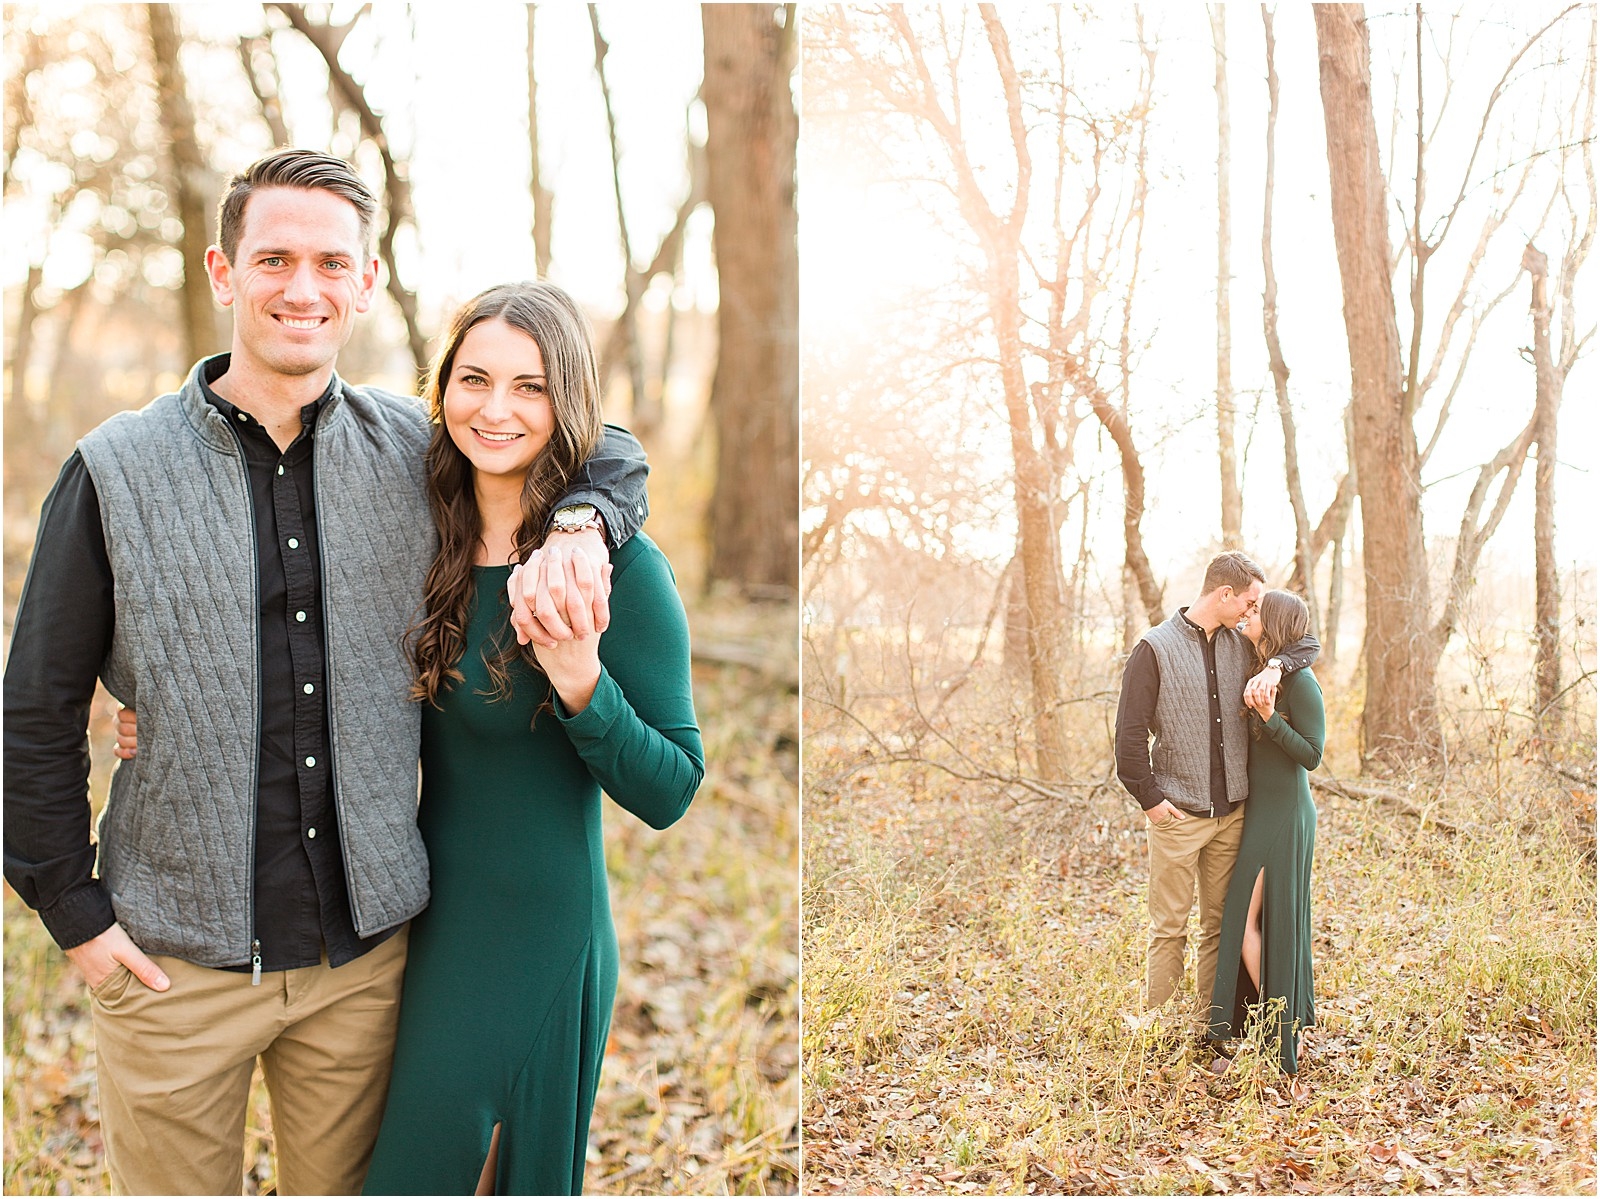 Kaley and Devon's fall Evansville Indiana engagement session. | #fallengagementsession #evansvilleindiana #evansvilleindianawedding | 0018.jpg